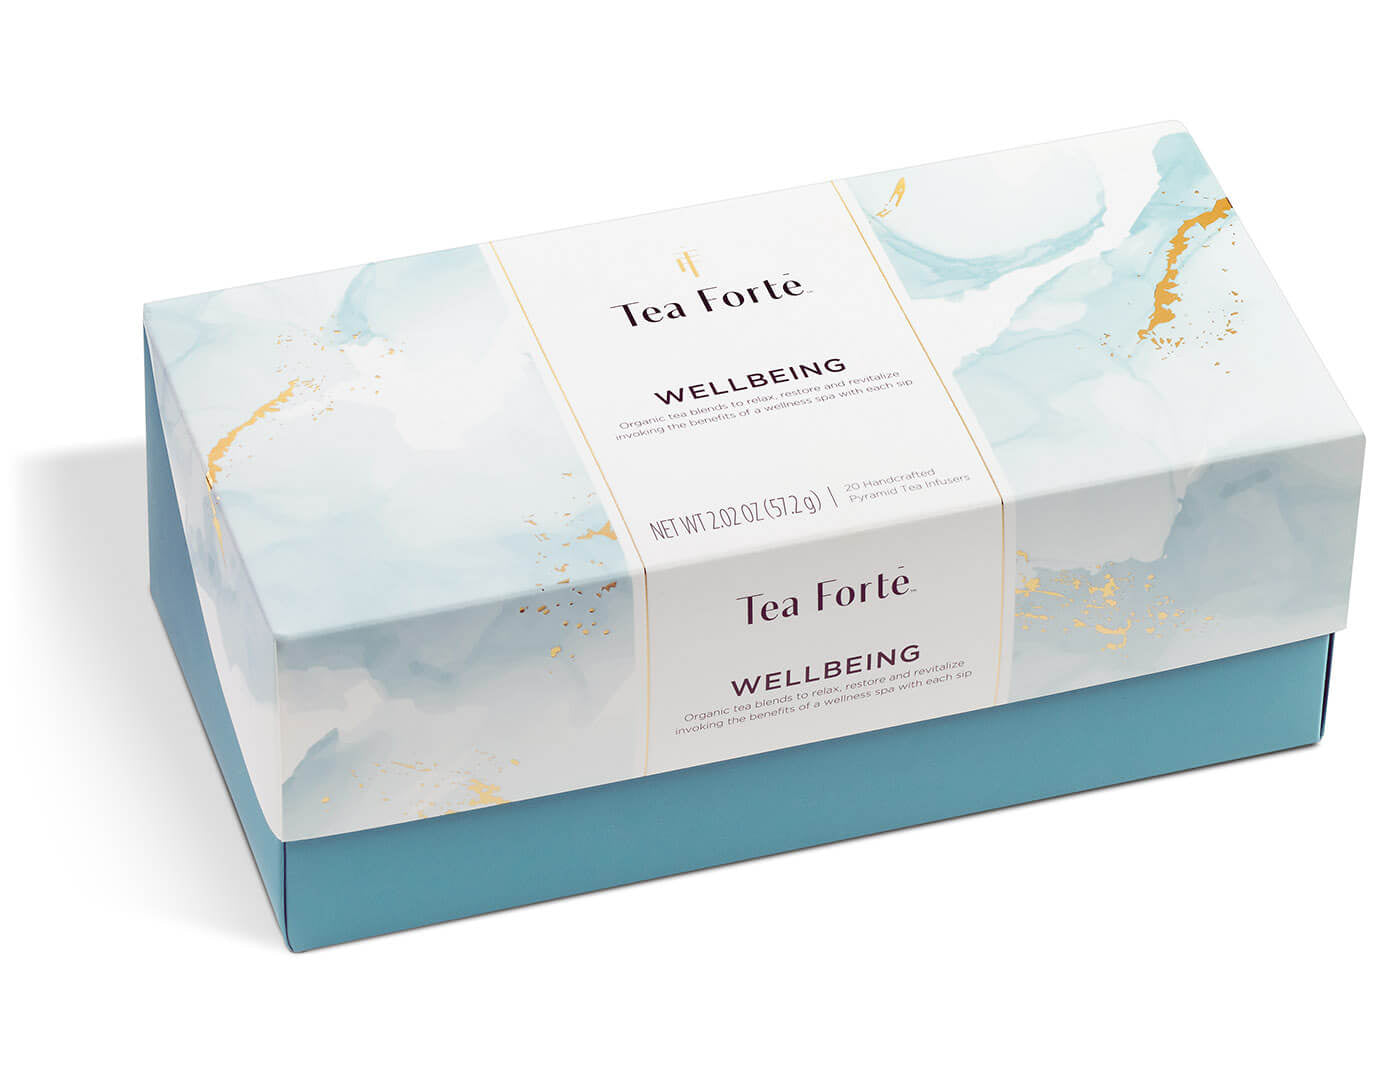 Wellbeing tea assortment in a 20 count presentation box with lid closed